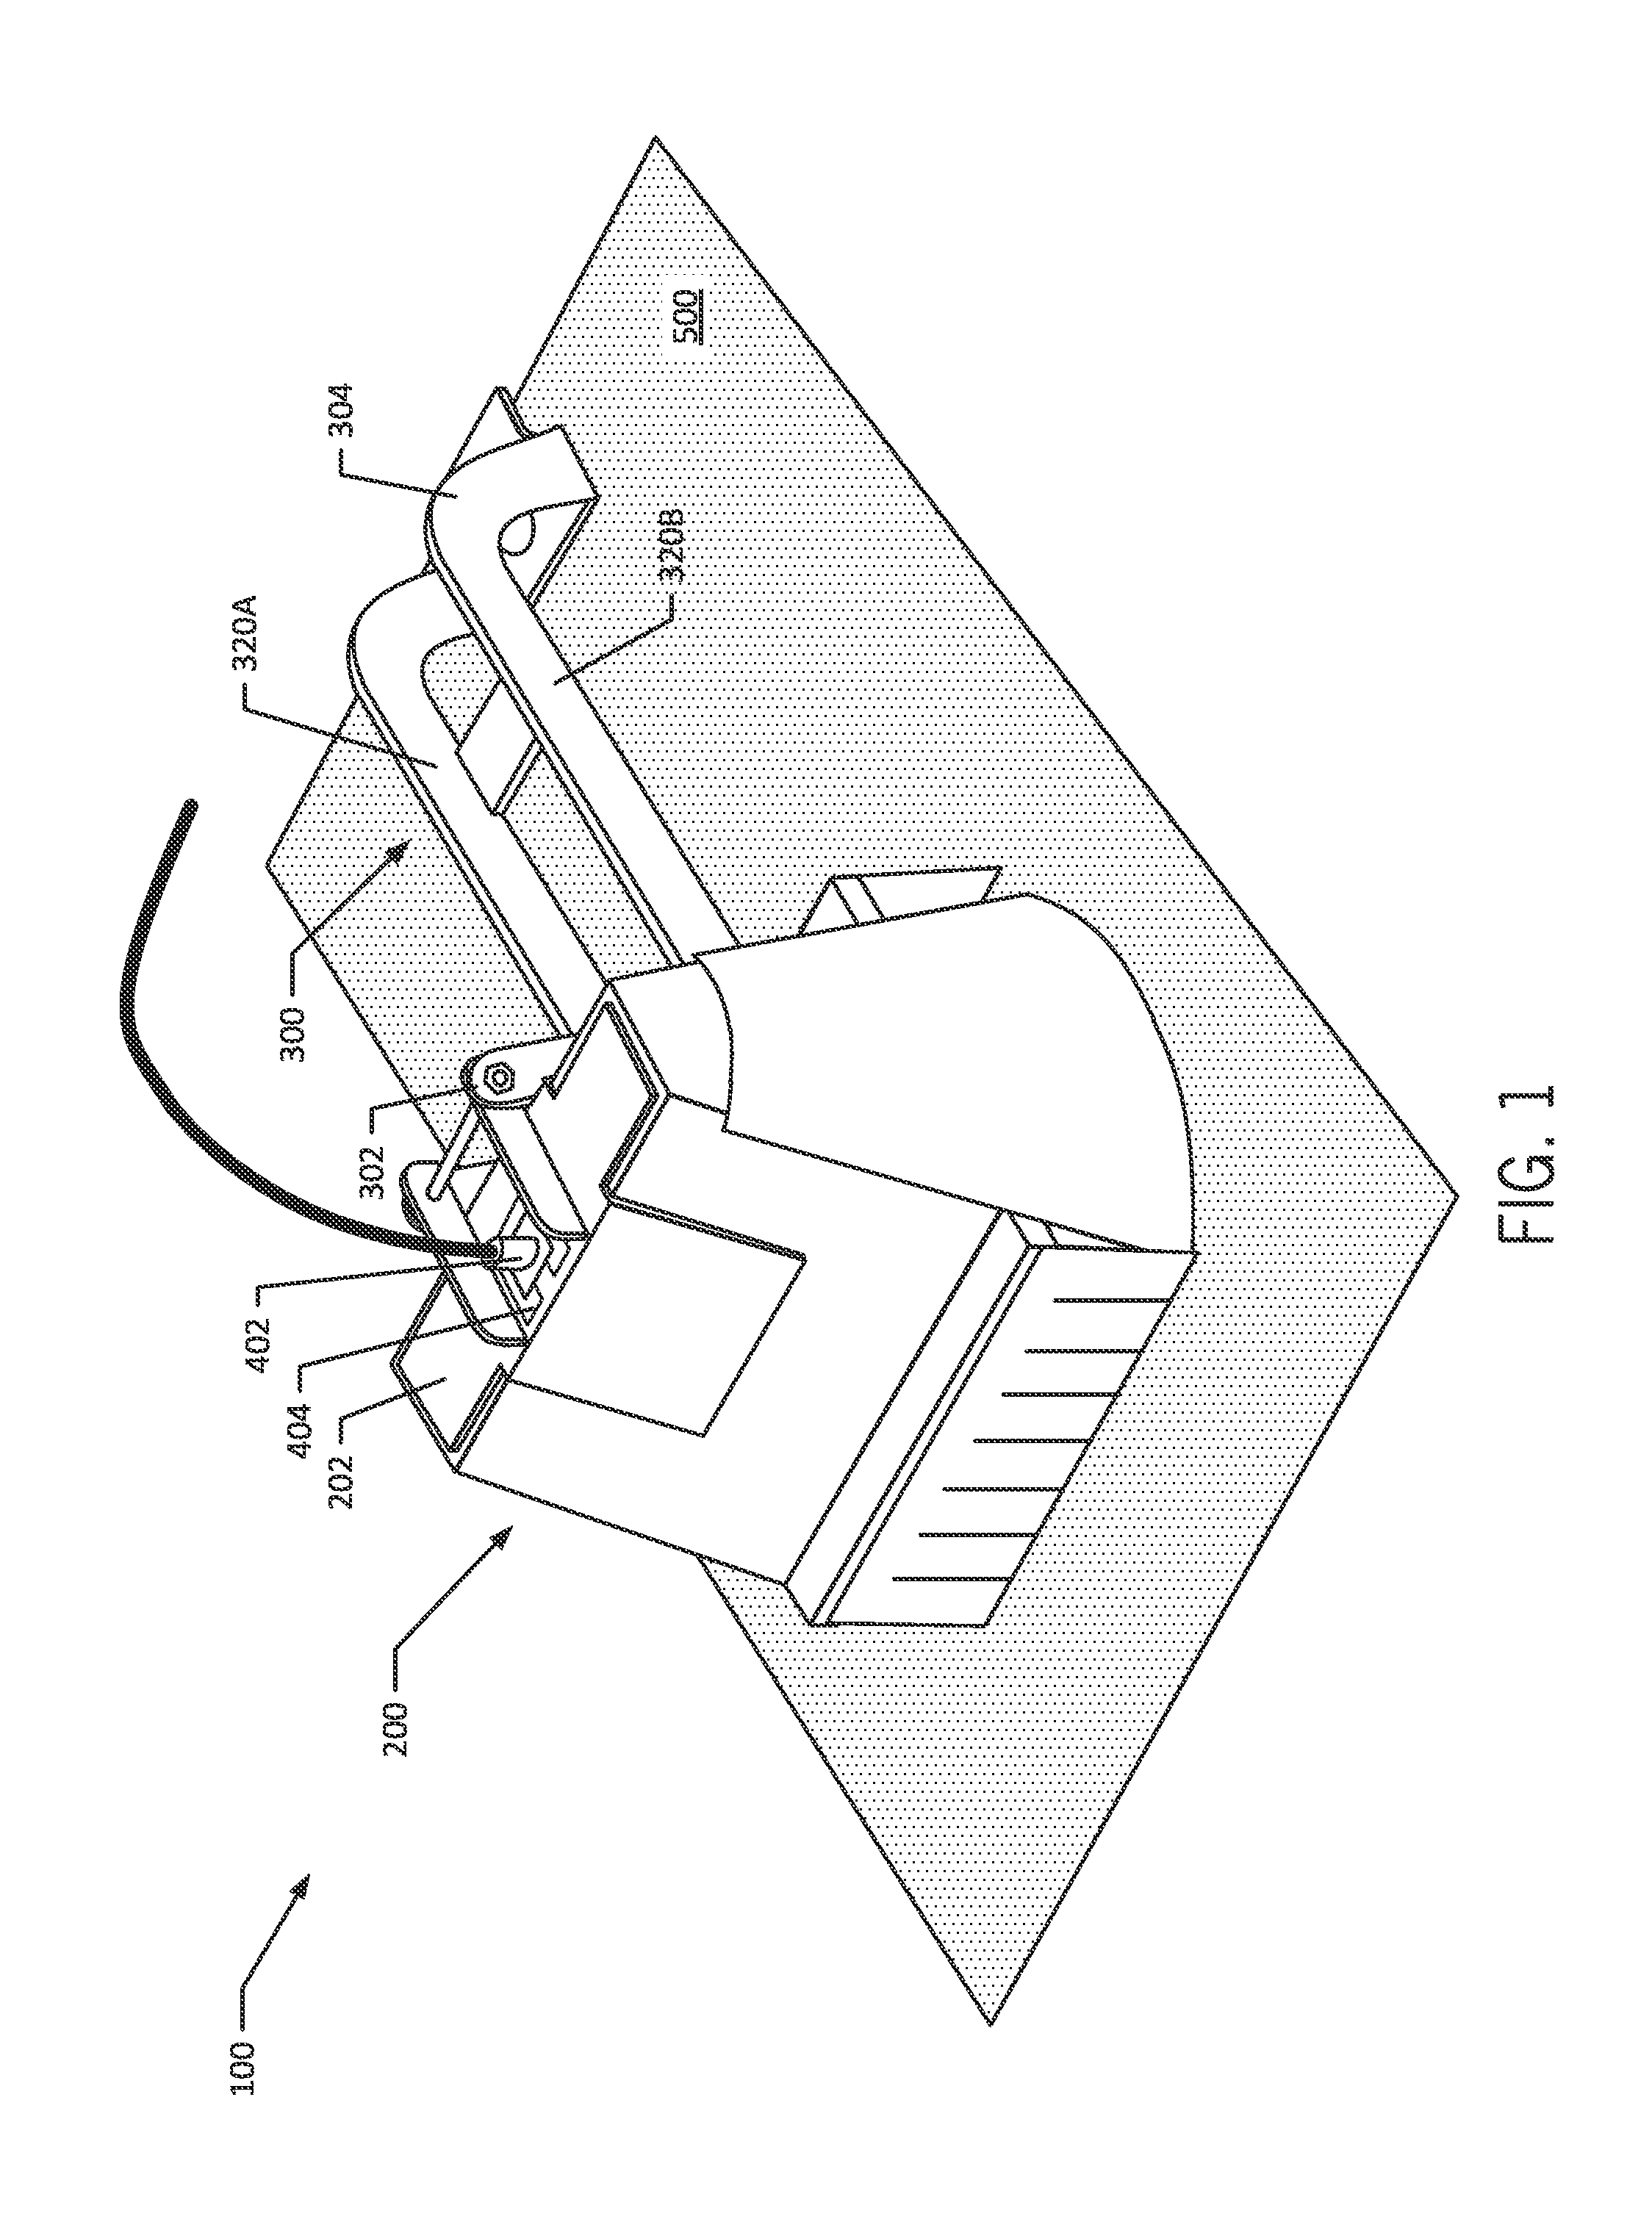 Agricultural spray containment devices, systems and methods